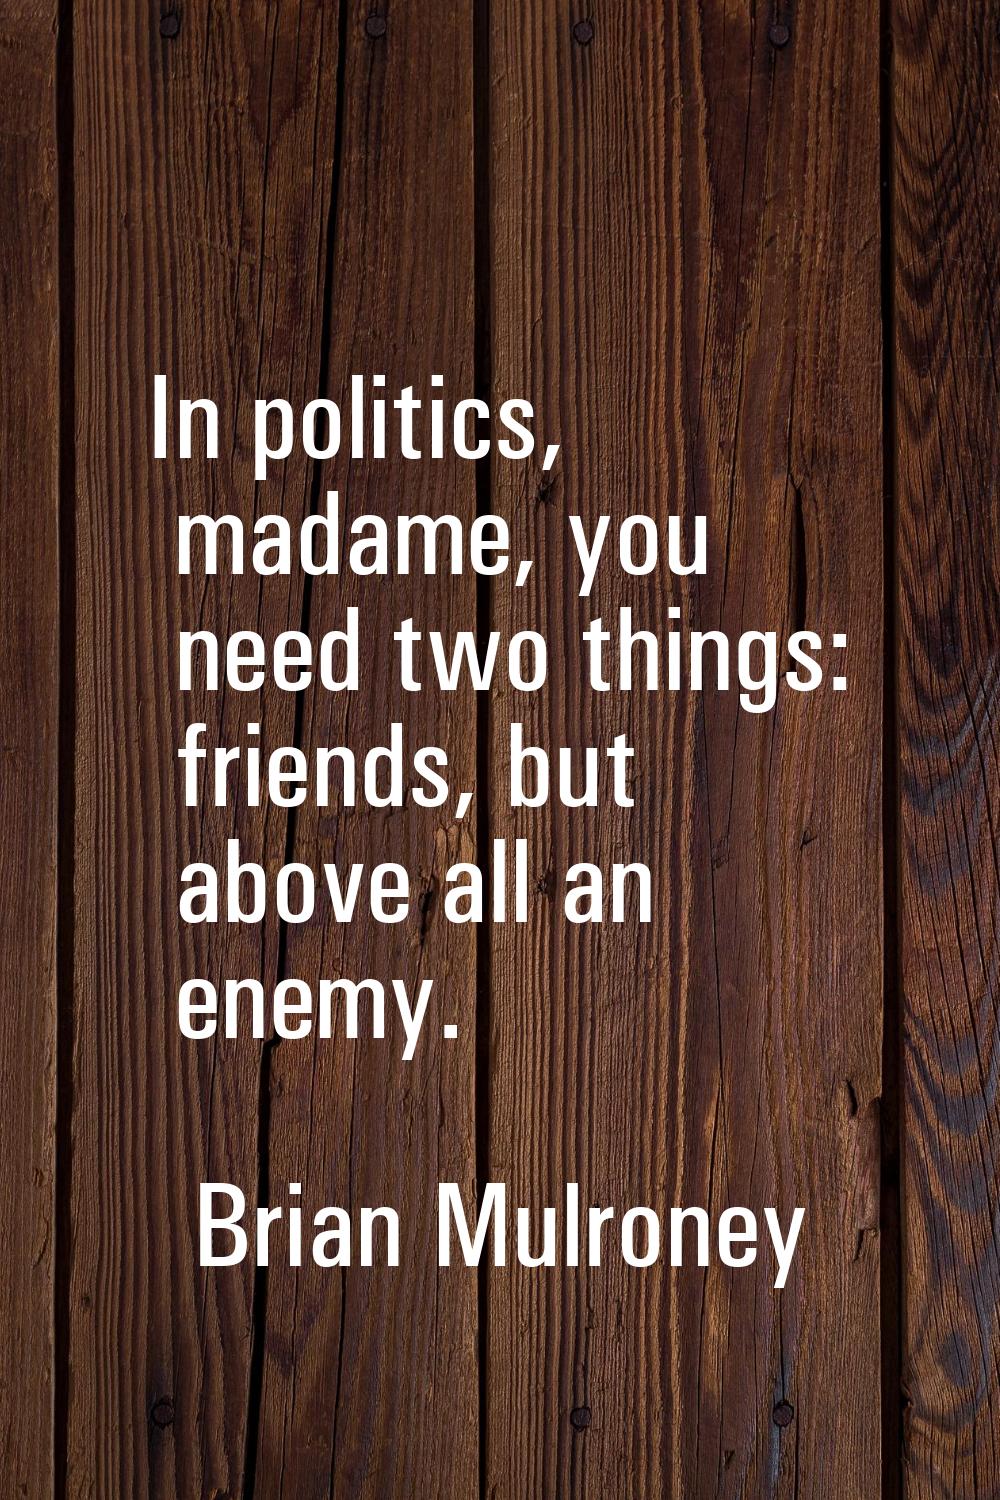 In politics, madame, you need two things: friends, but above all an enemy.